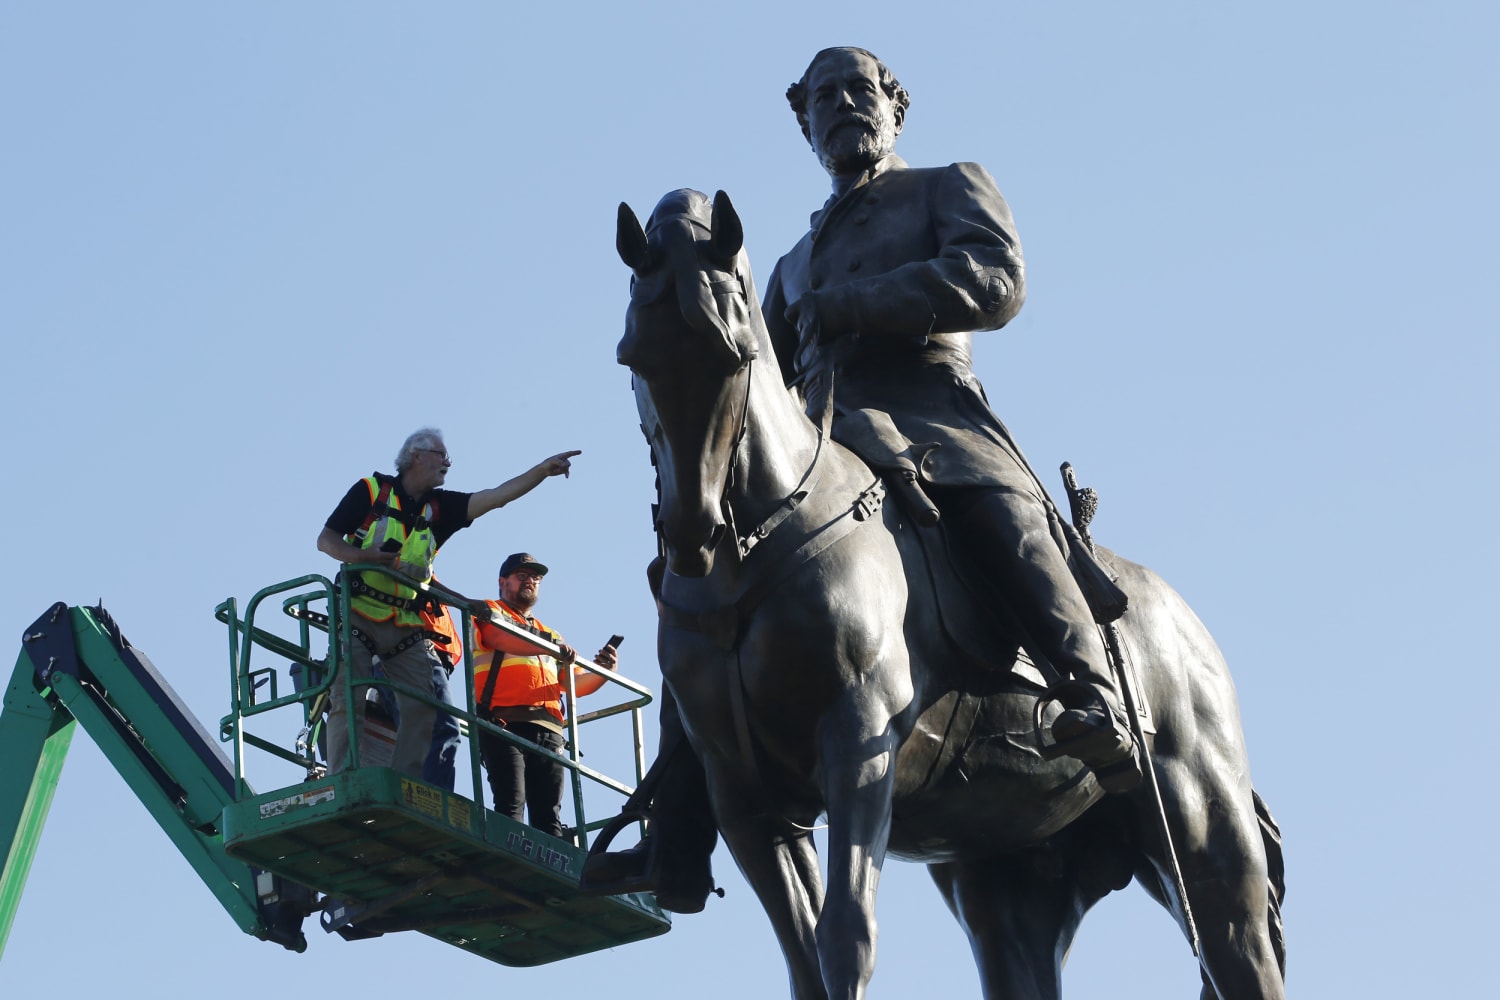 Judge blocks removal of Richmond Robert E. Lee statue for 10 days